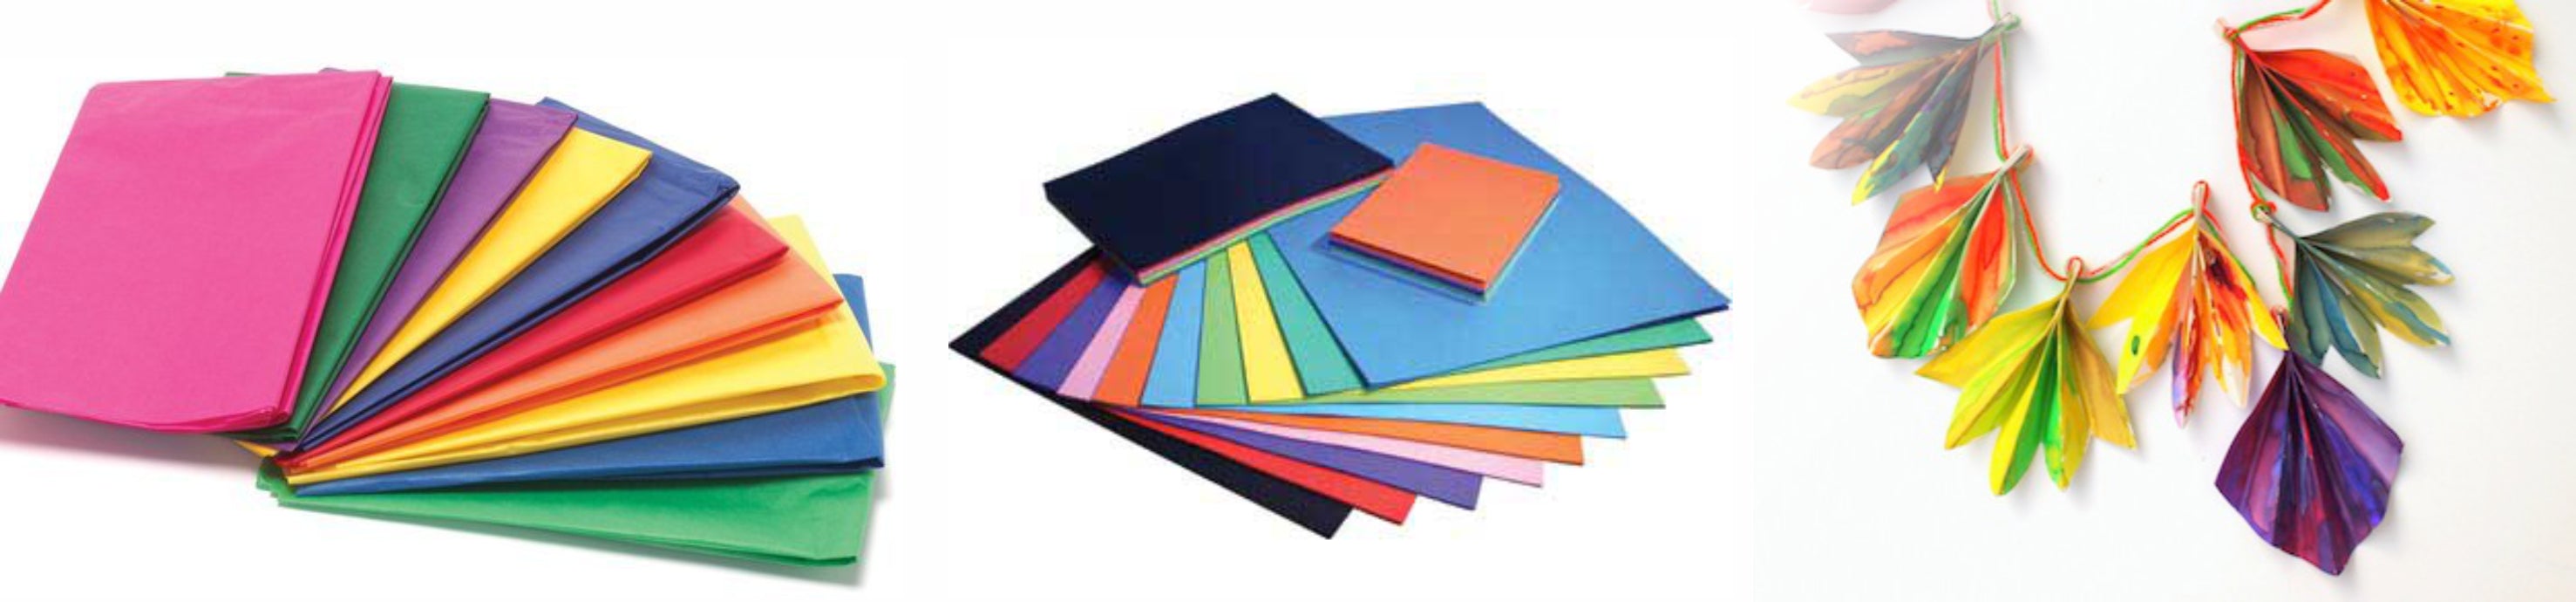 Art & Crafts Papers